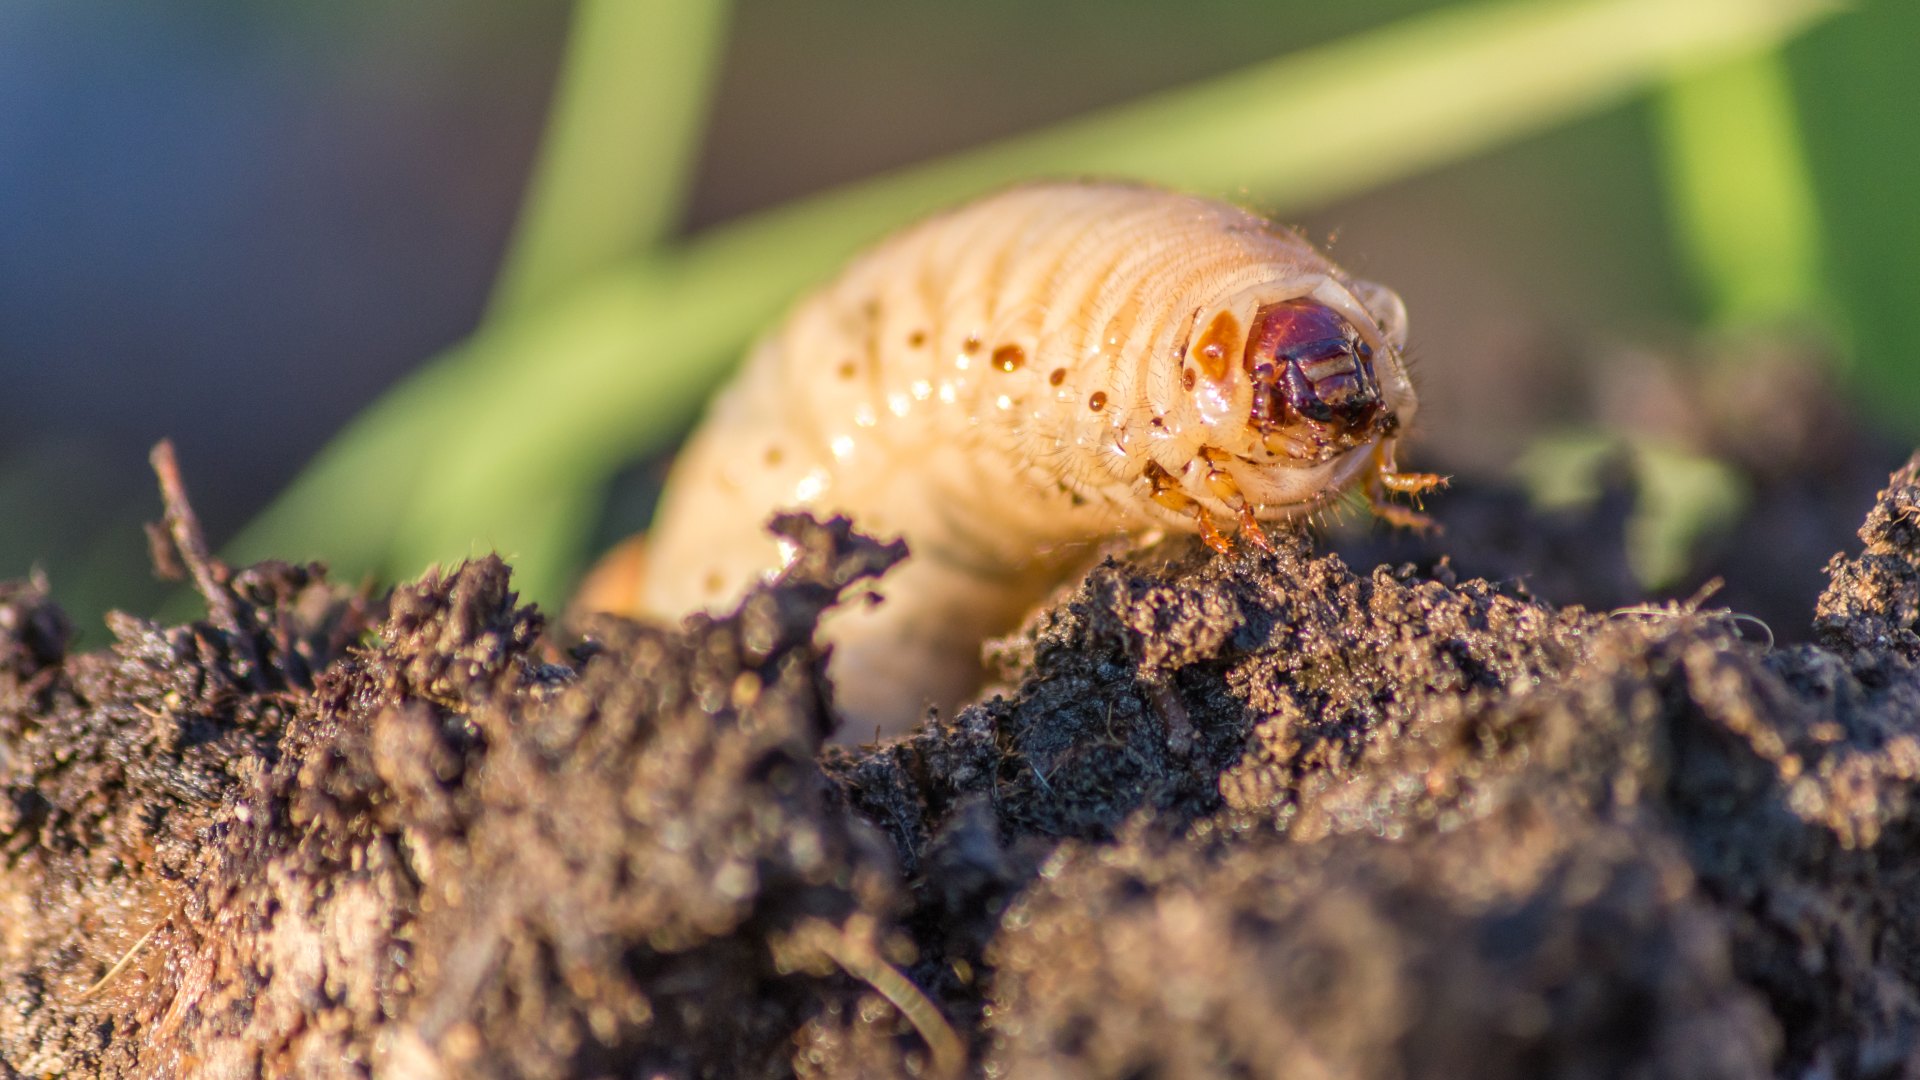 A grub crawling out from soil in Raymore, MO.